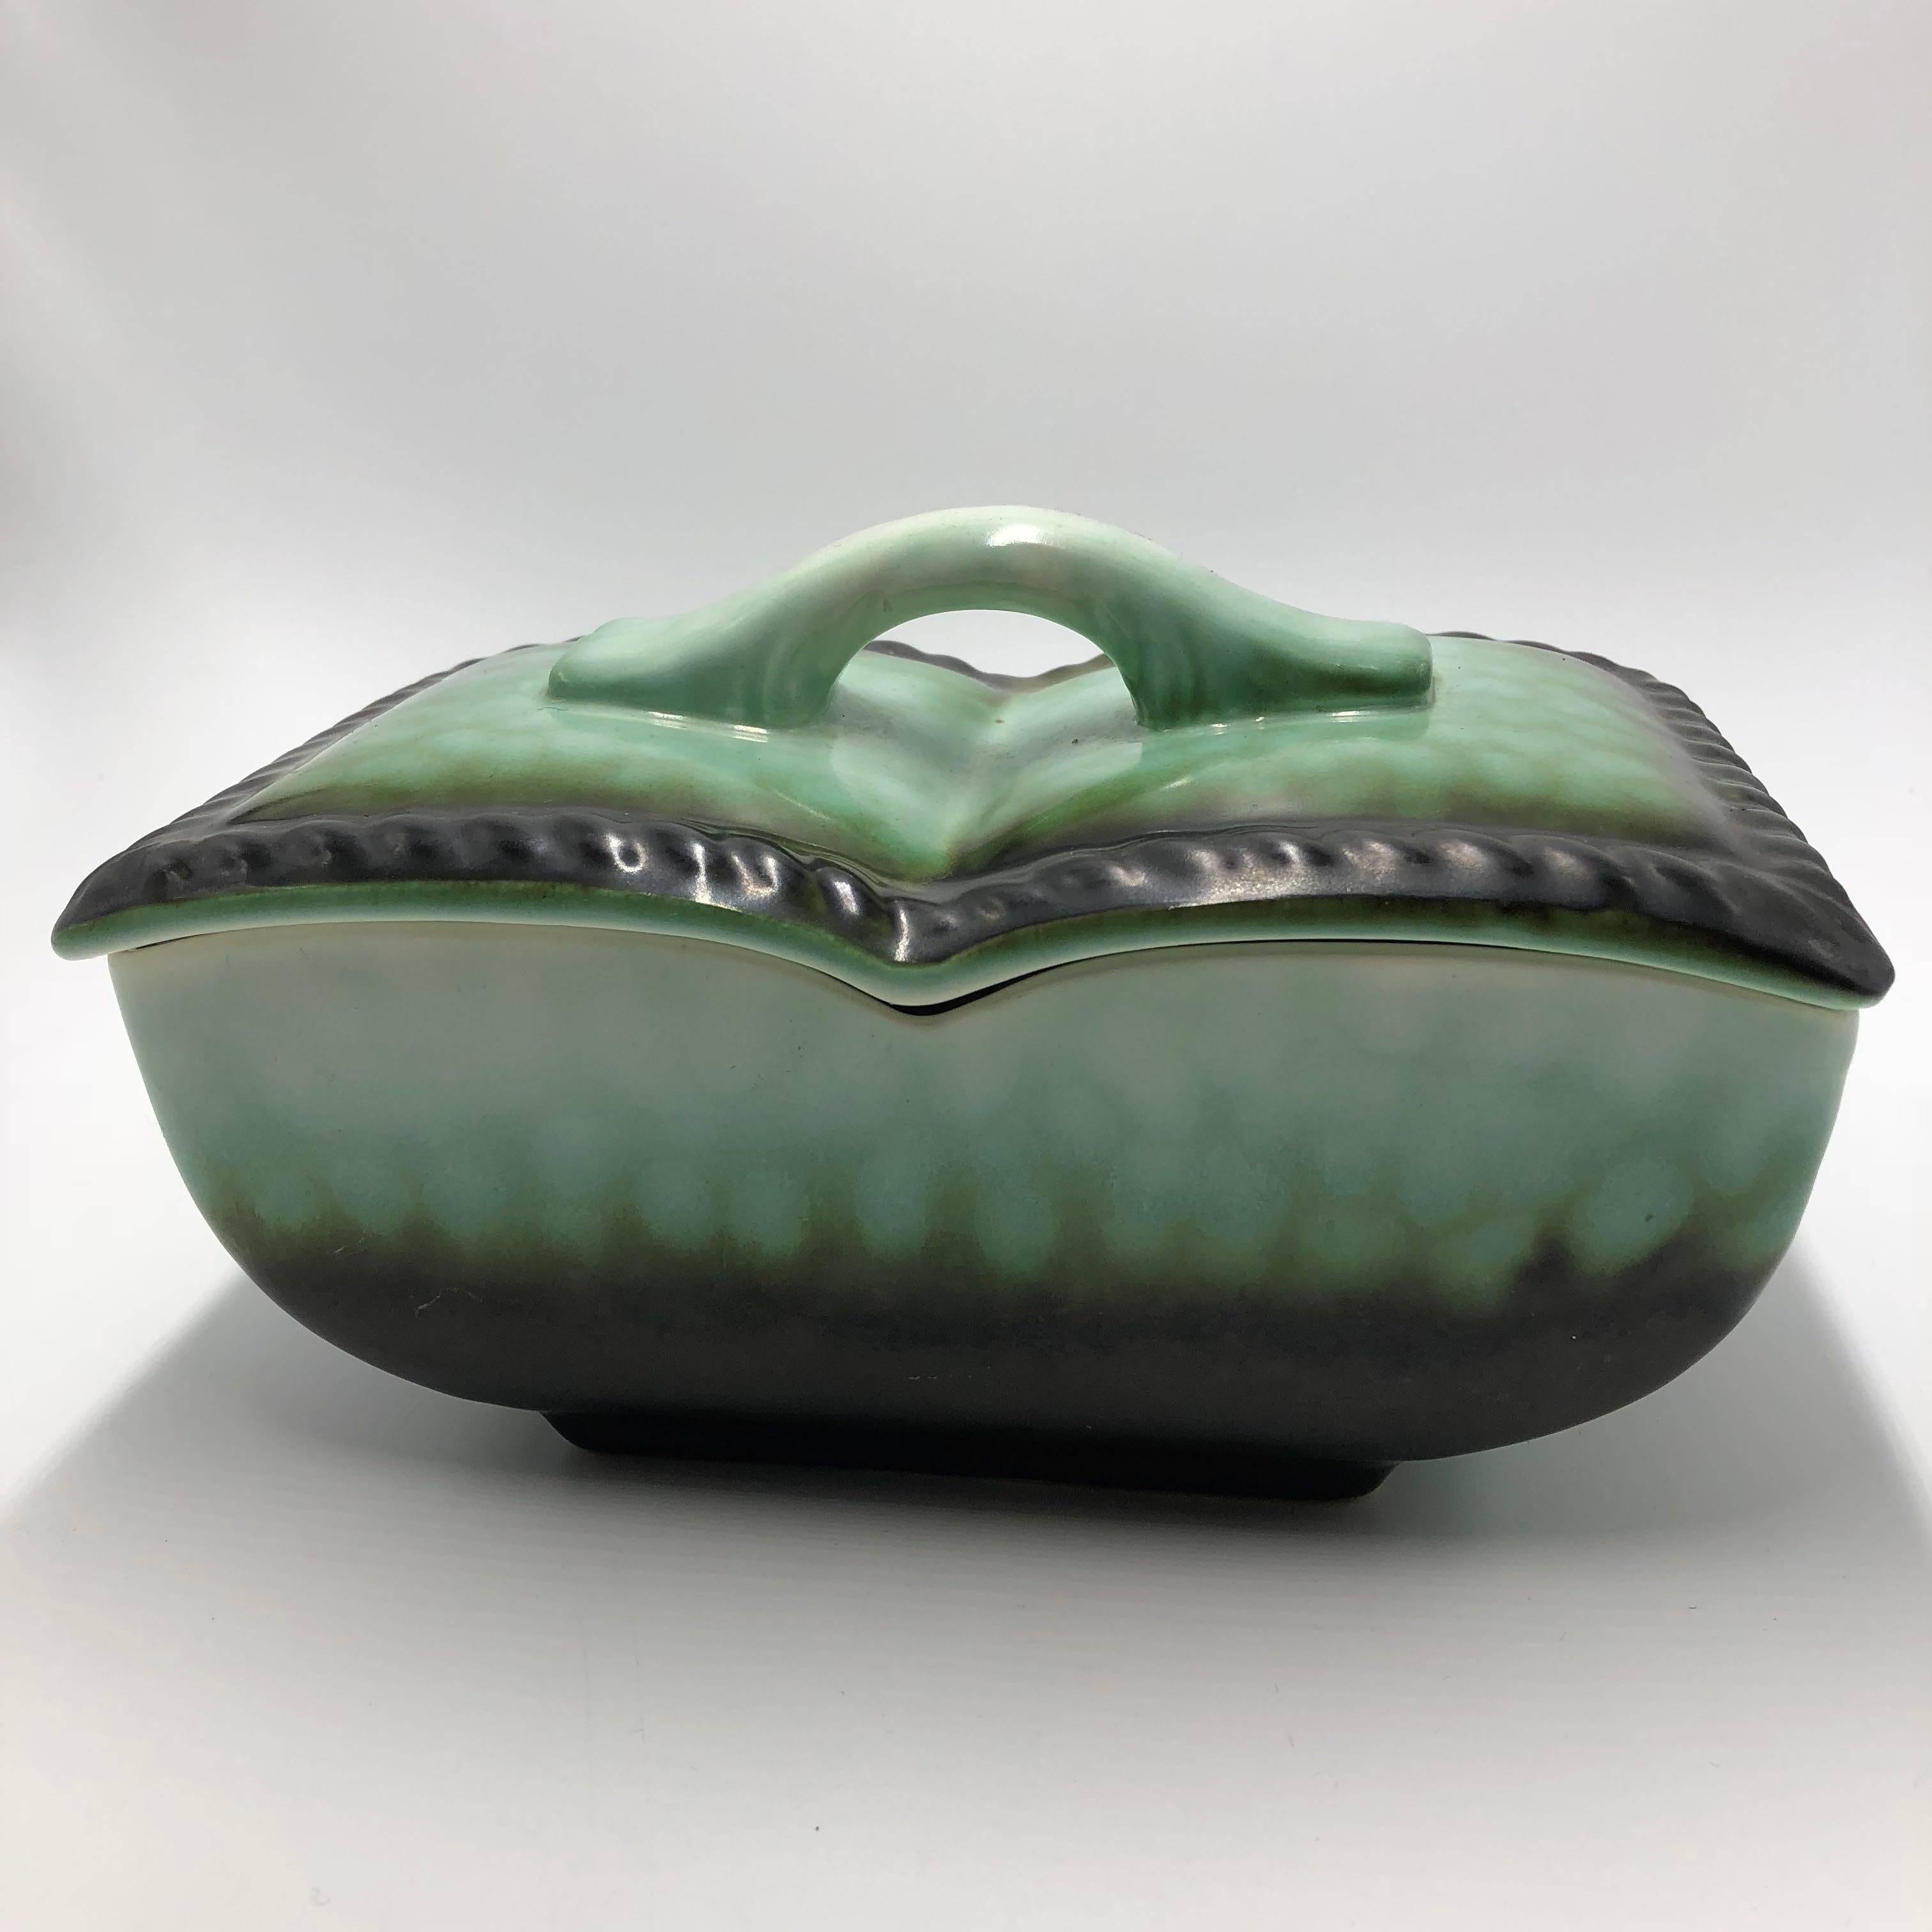 1930s Faience Elsterwerda Bonbon Dish or Box, Art Deco In Good Condition For Sale In Achterveld, NL